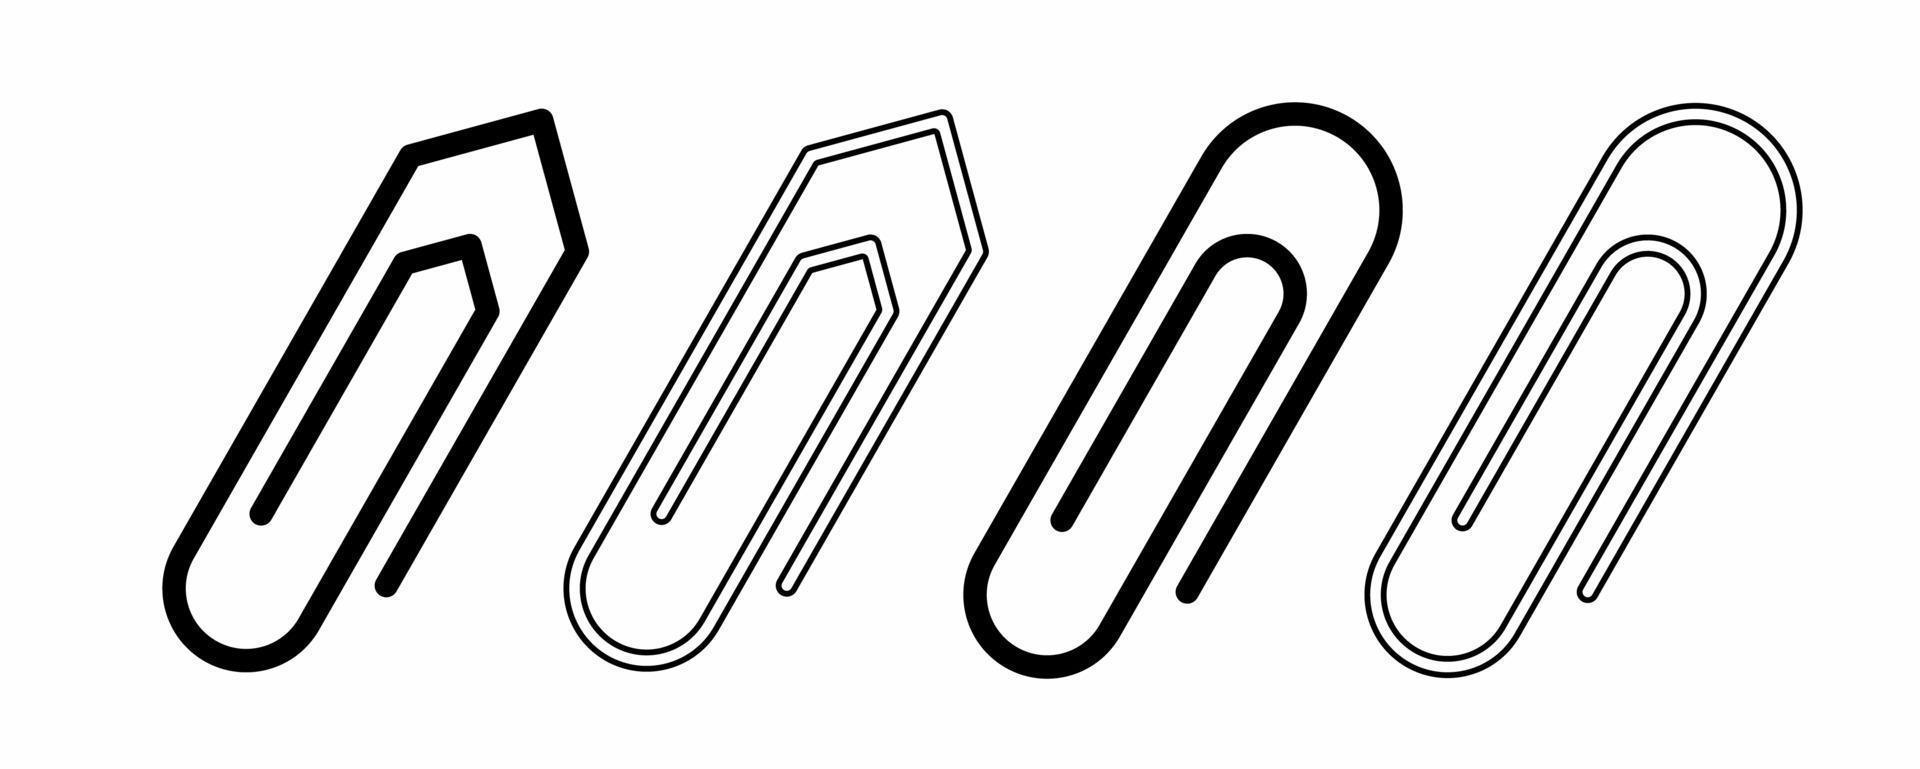 outline silhouette paper clip icon set isolated on white background vector